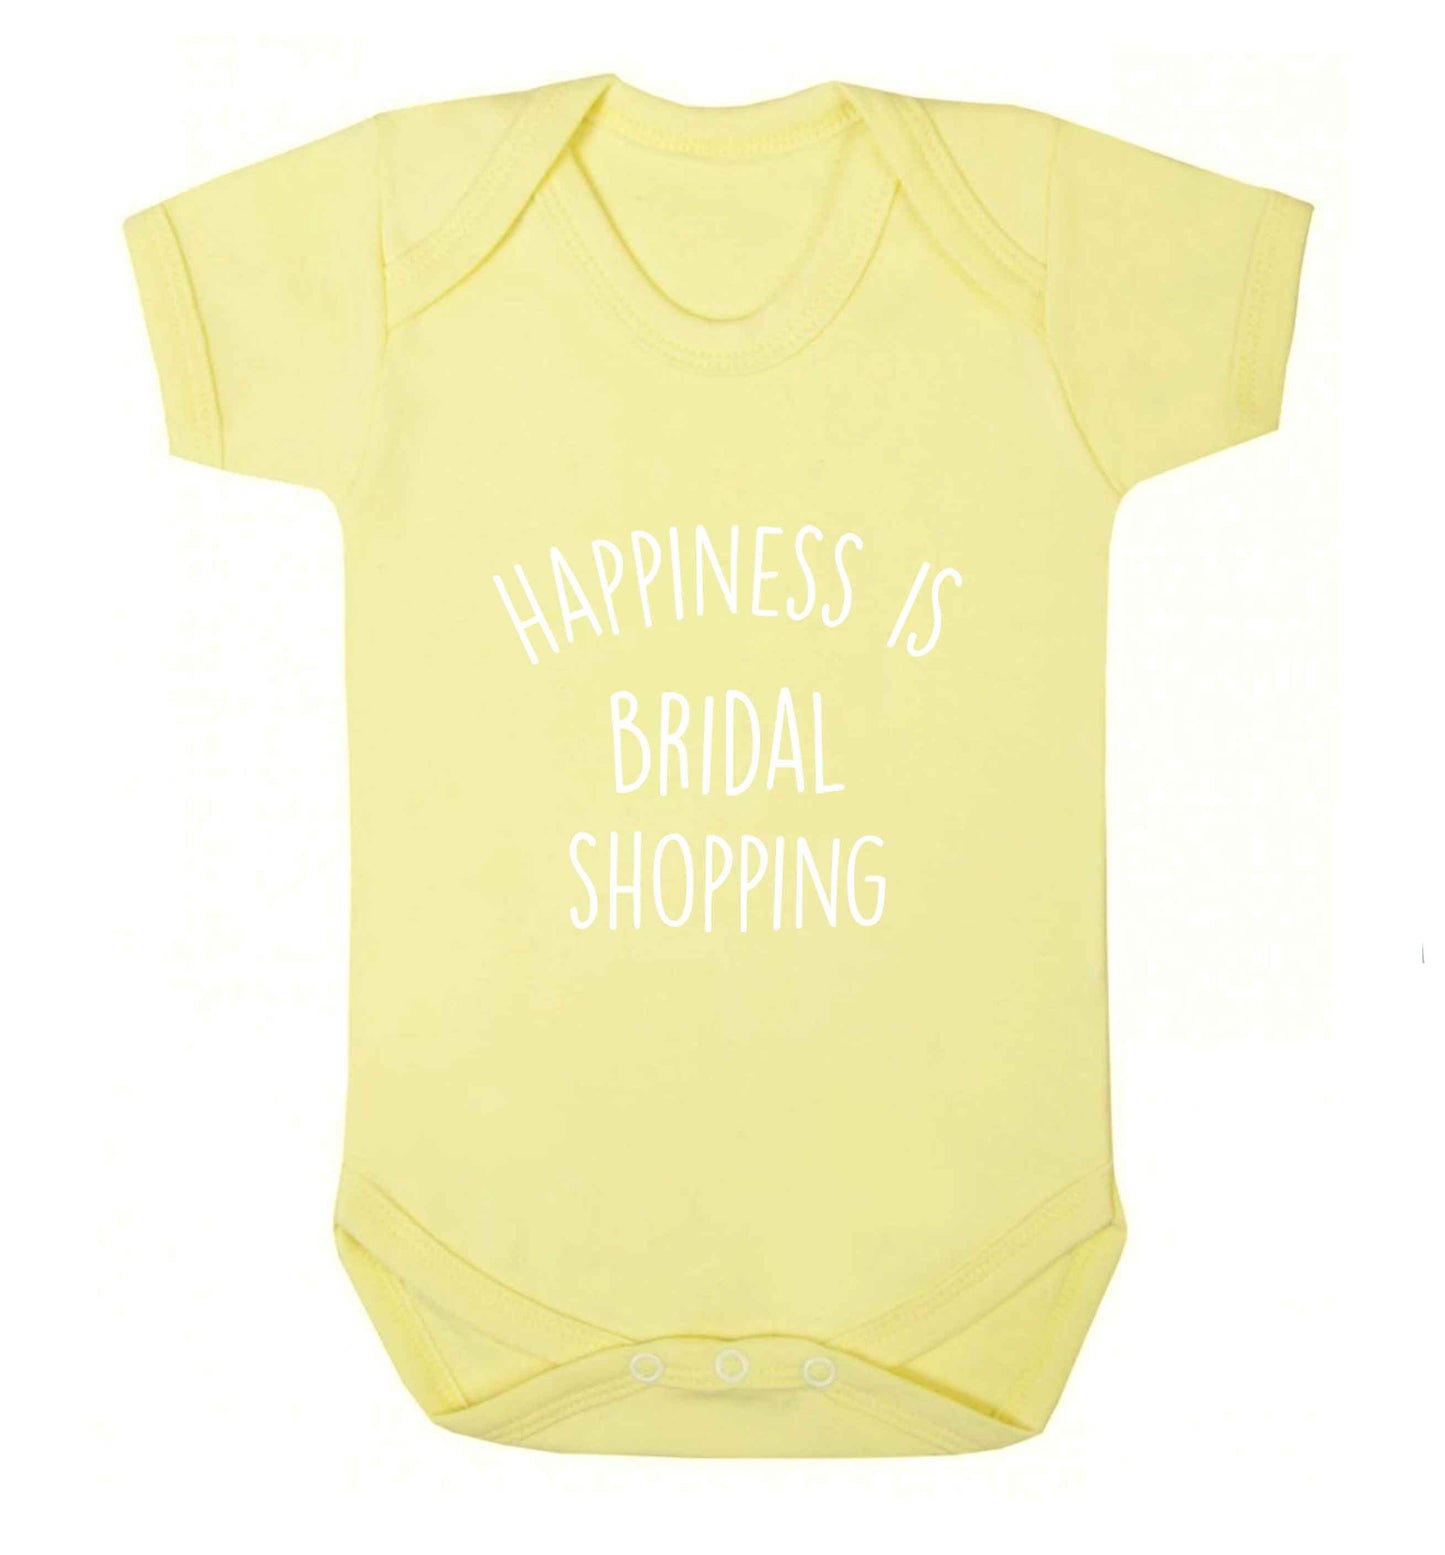 Happiness is bridal shopping baby vest pale yellow 18-24 months